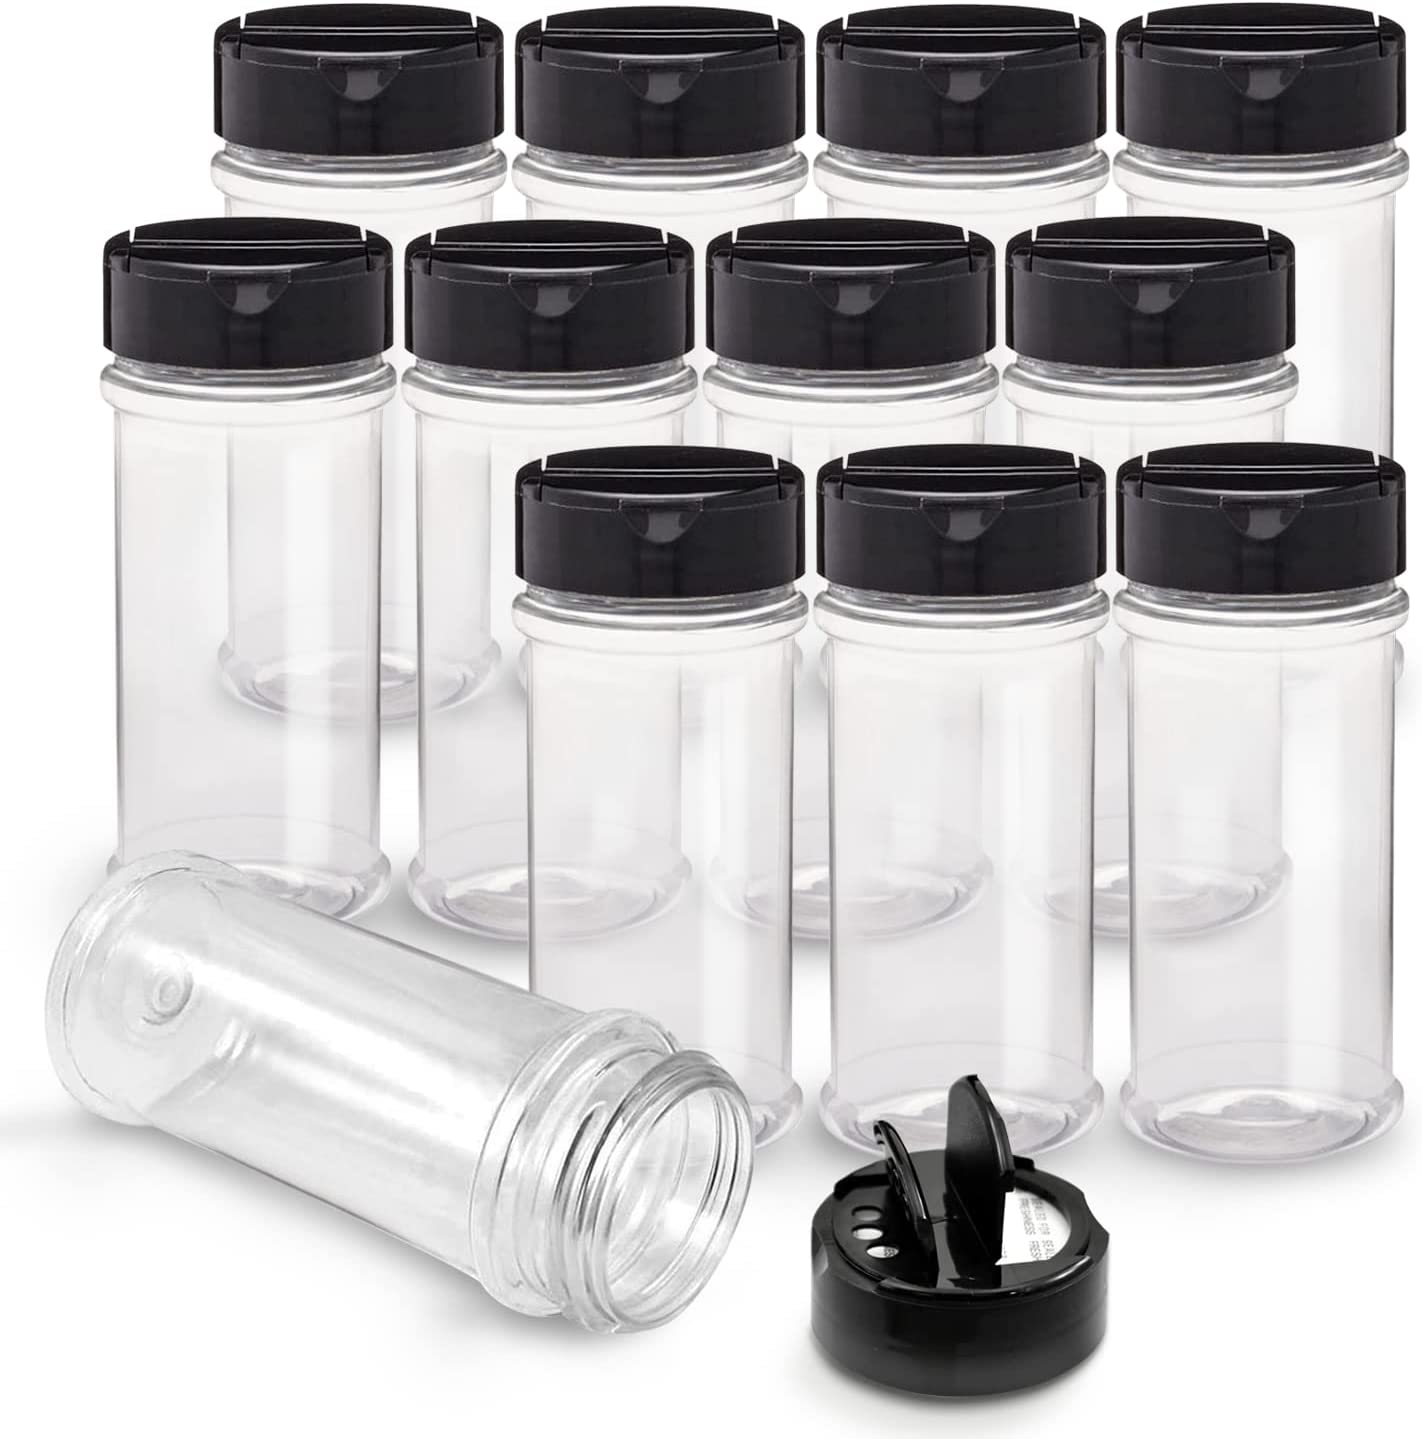 CycleMore 48 Pack 4oz Glass Spice Jars Bottles, Square Spice